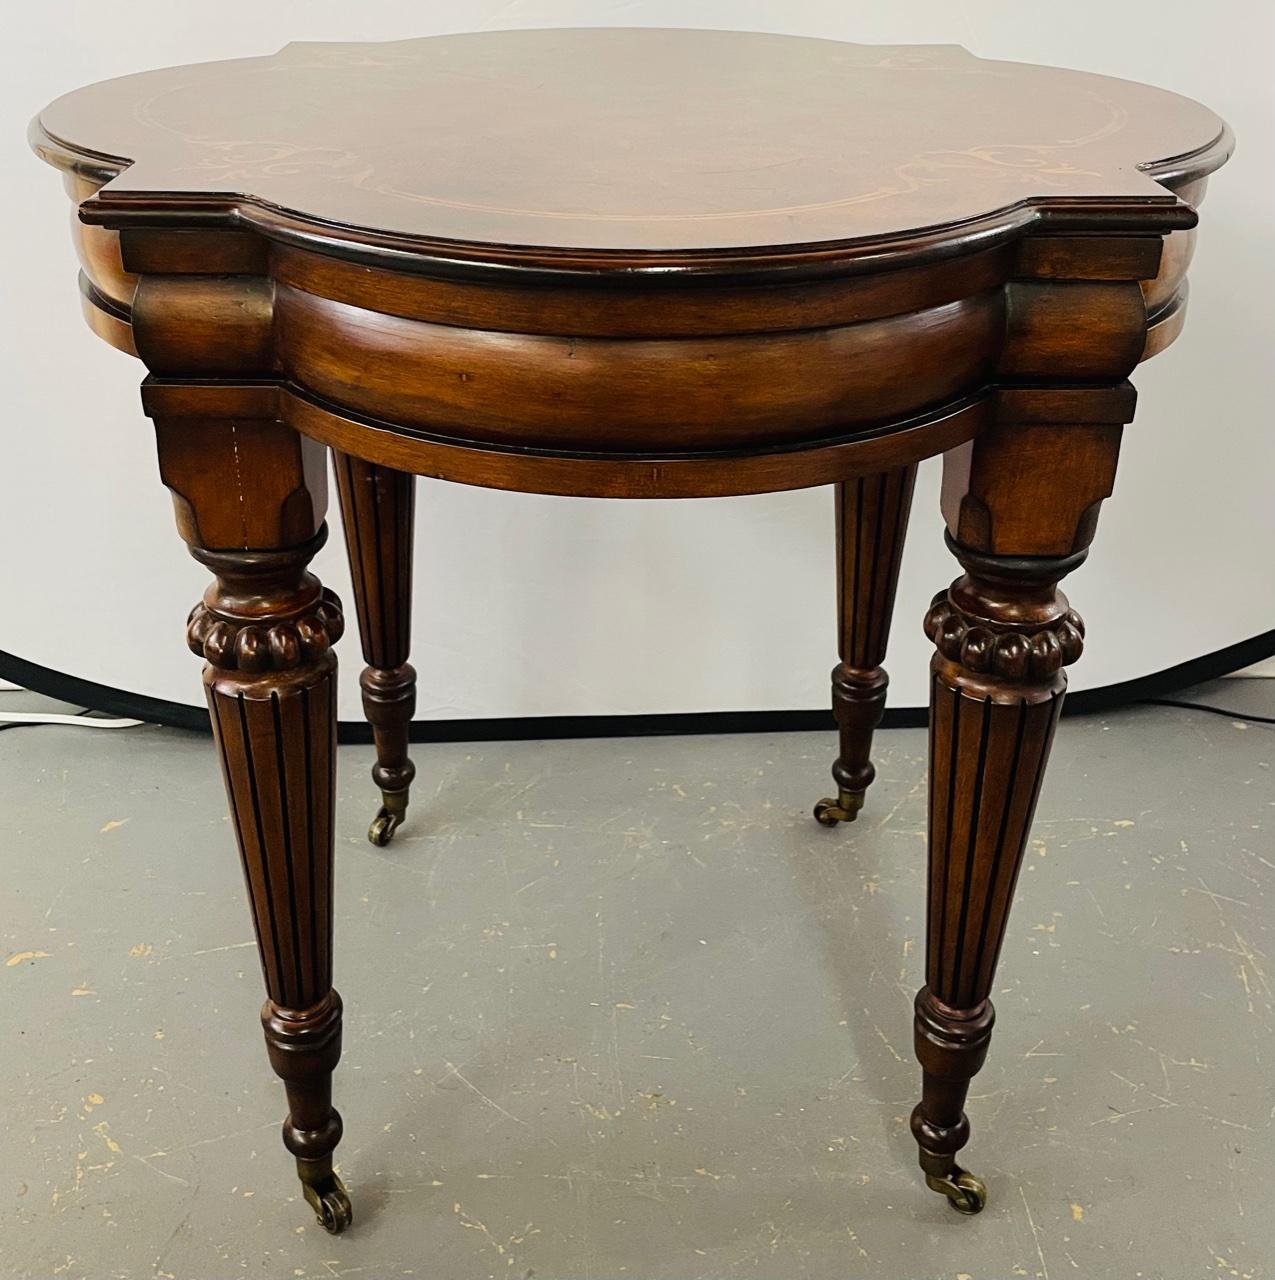 Made of birch and zebrano wood, this high quality Ethan Allen Tuscany marquetry end table or side table with amazing inlay design on the top and standing on four finely carved legs with aprons and standing on casters to easily move around your